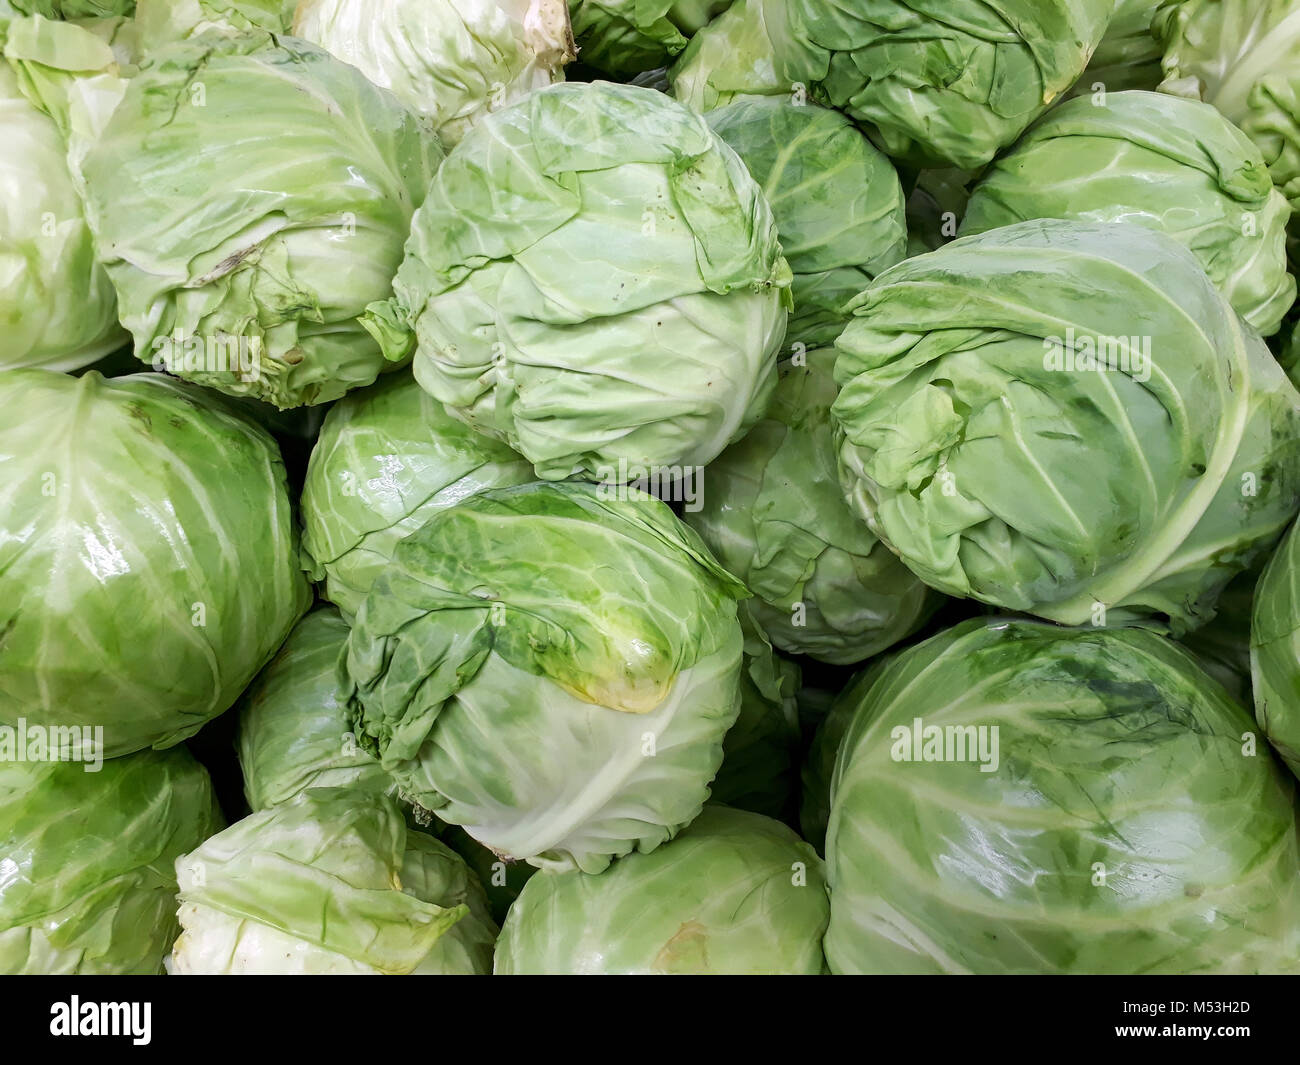 Pile of young cabbage heads close up, may be used as background Stock Photo